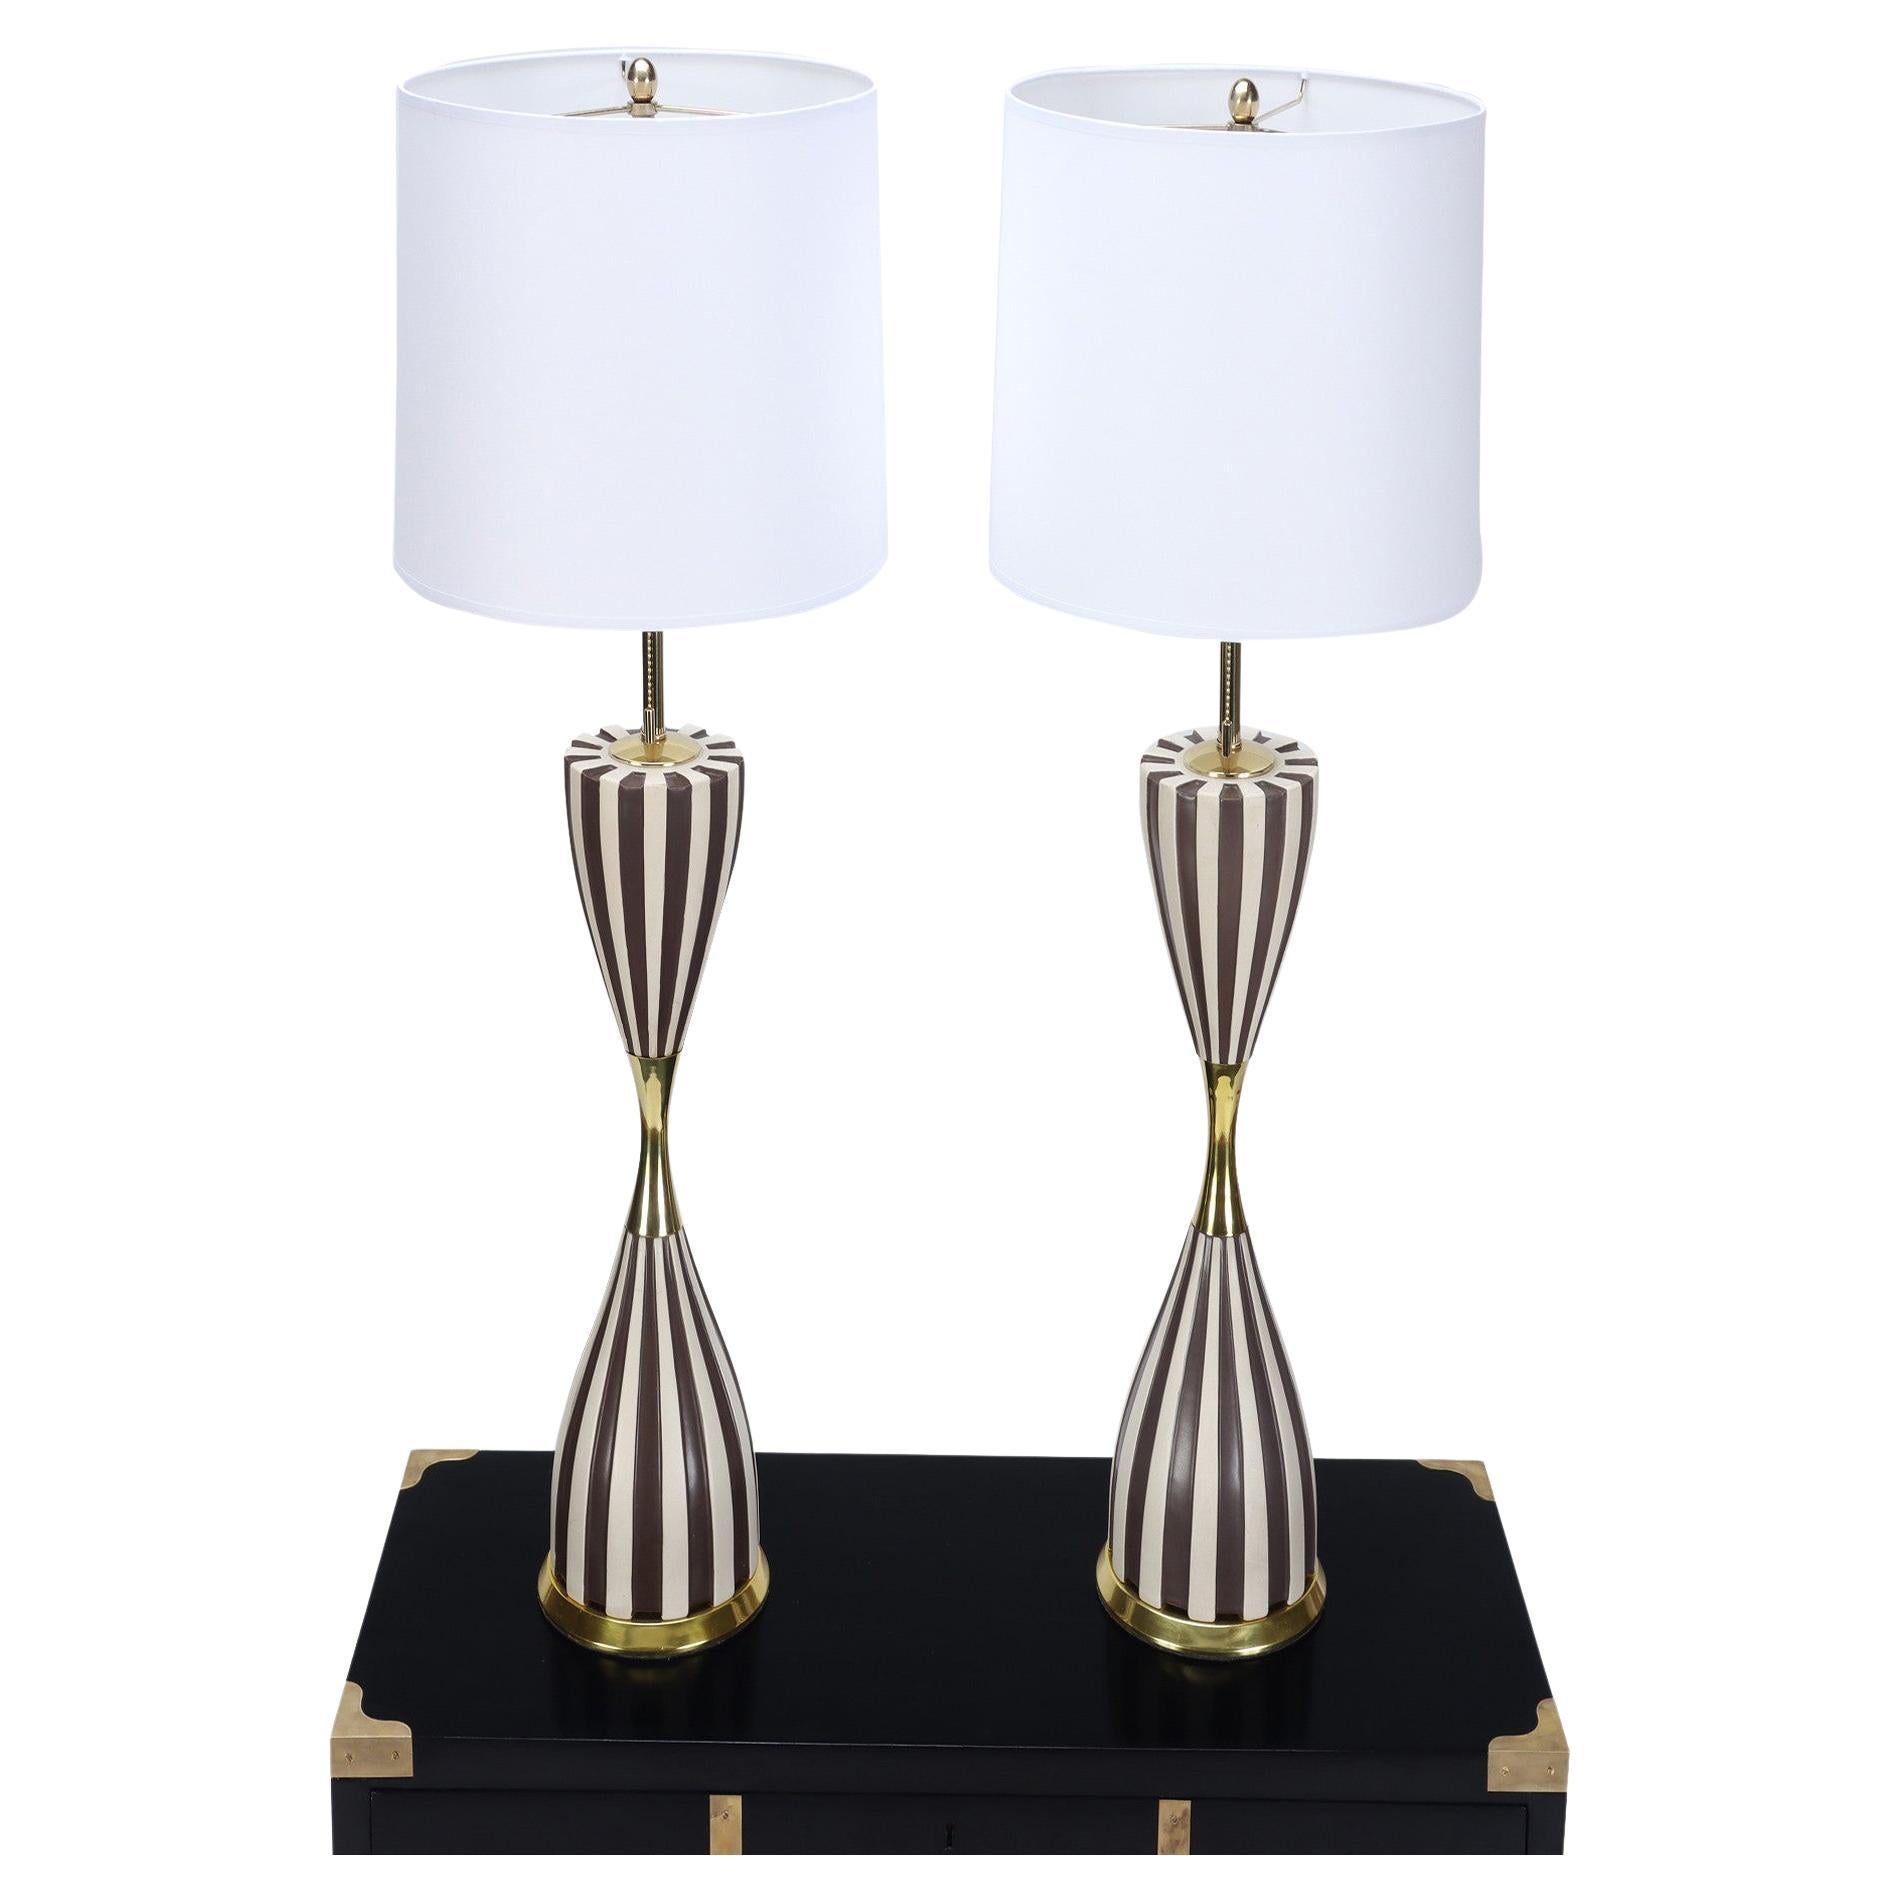 Pair of Mid Century "Harlequin" Table Lamps by Gerald Thurston, Circa 1950